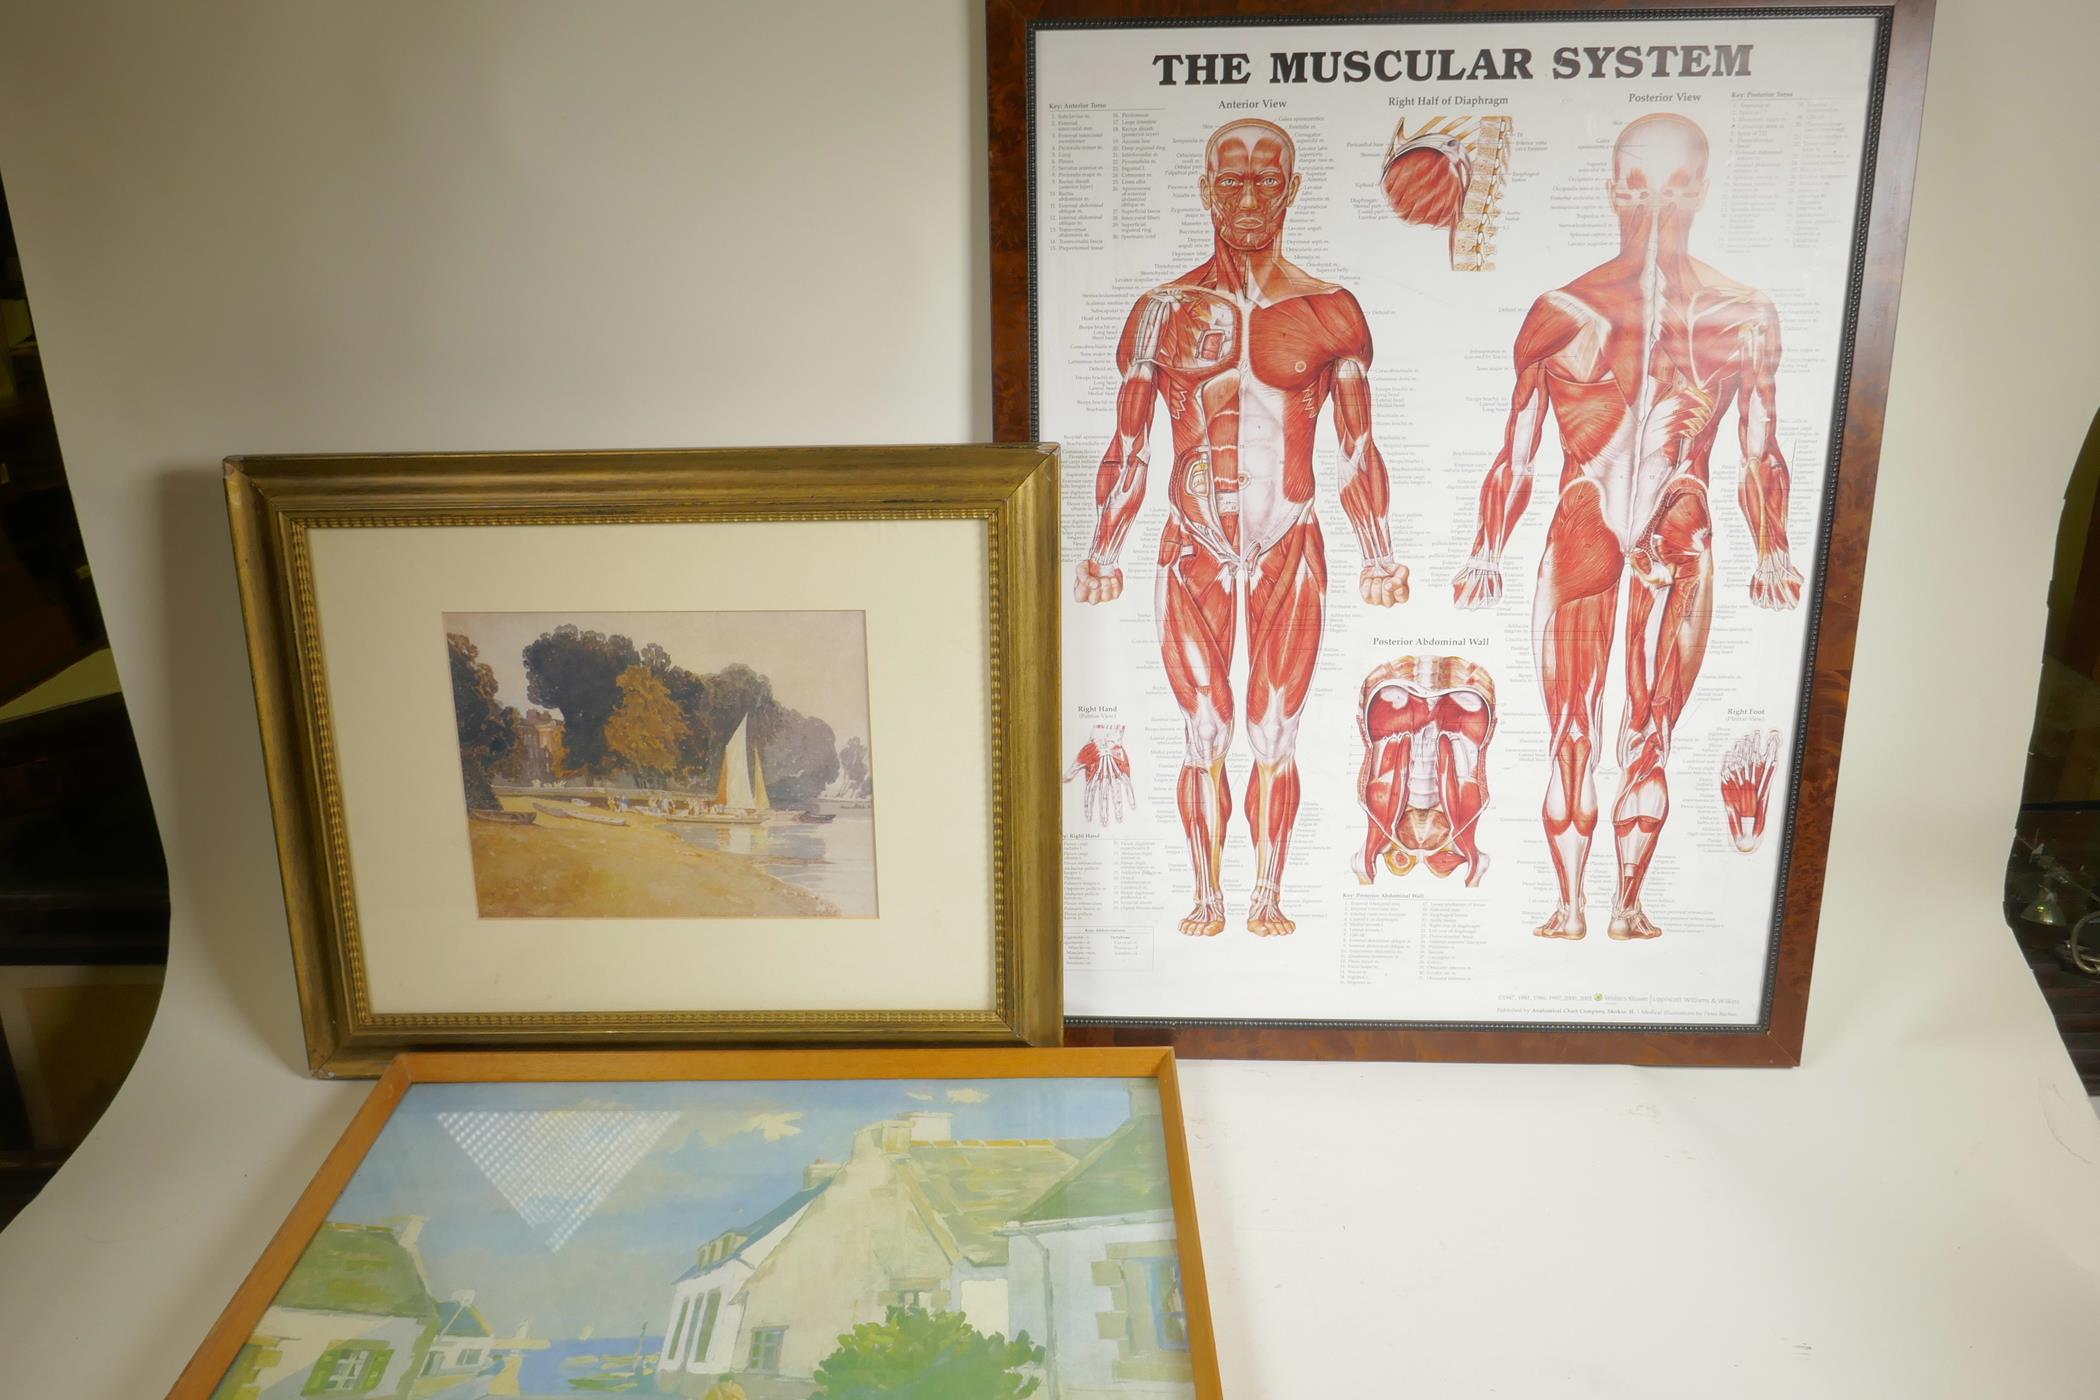 A colour print of figures on a riverbank, 11" x 8½", together with a print of the human muscular